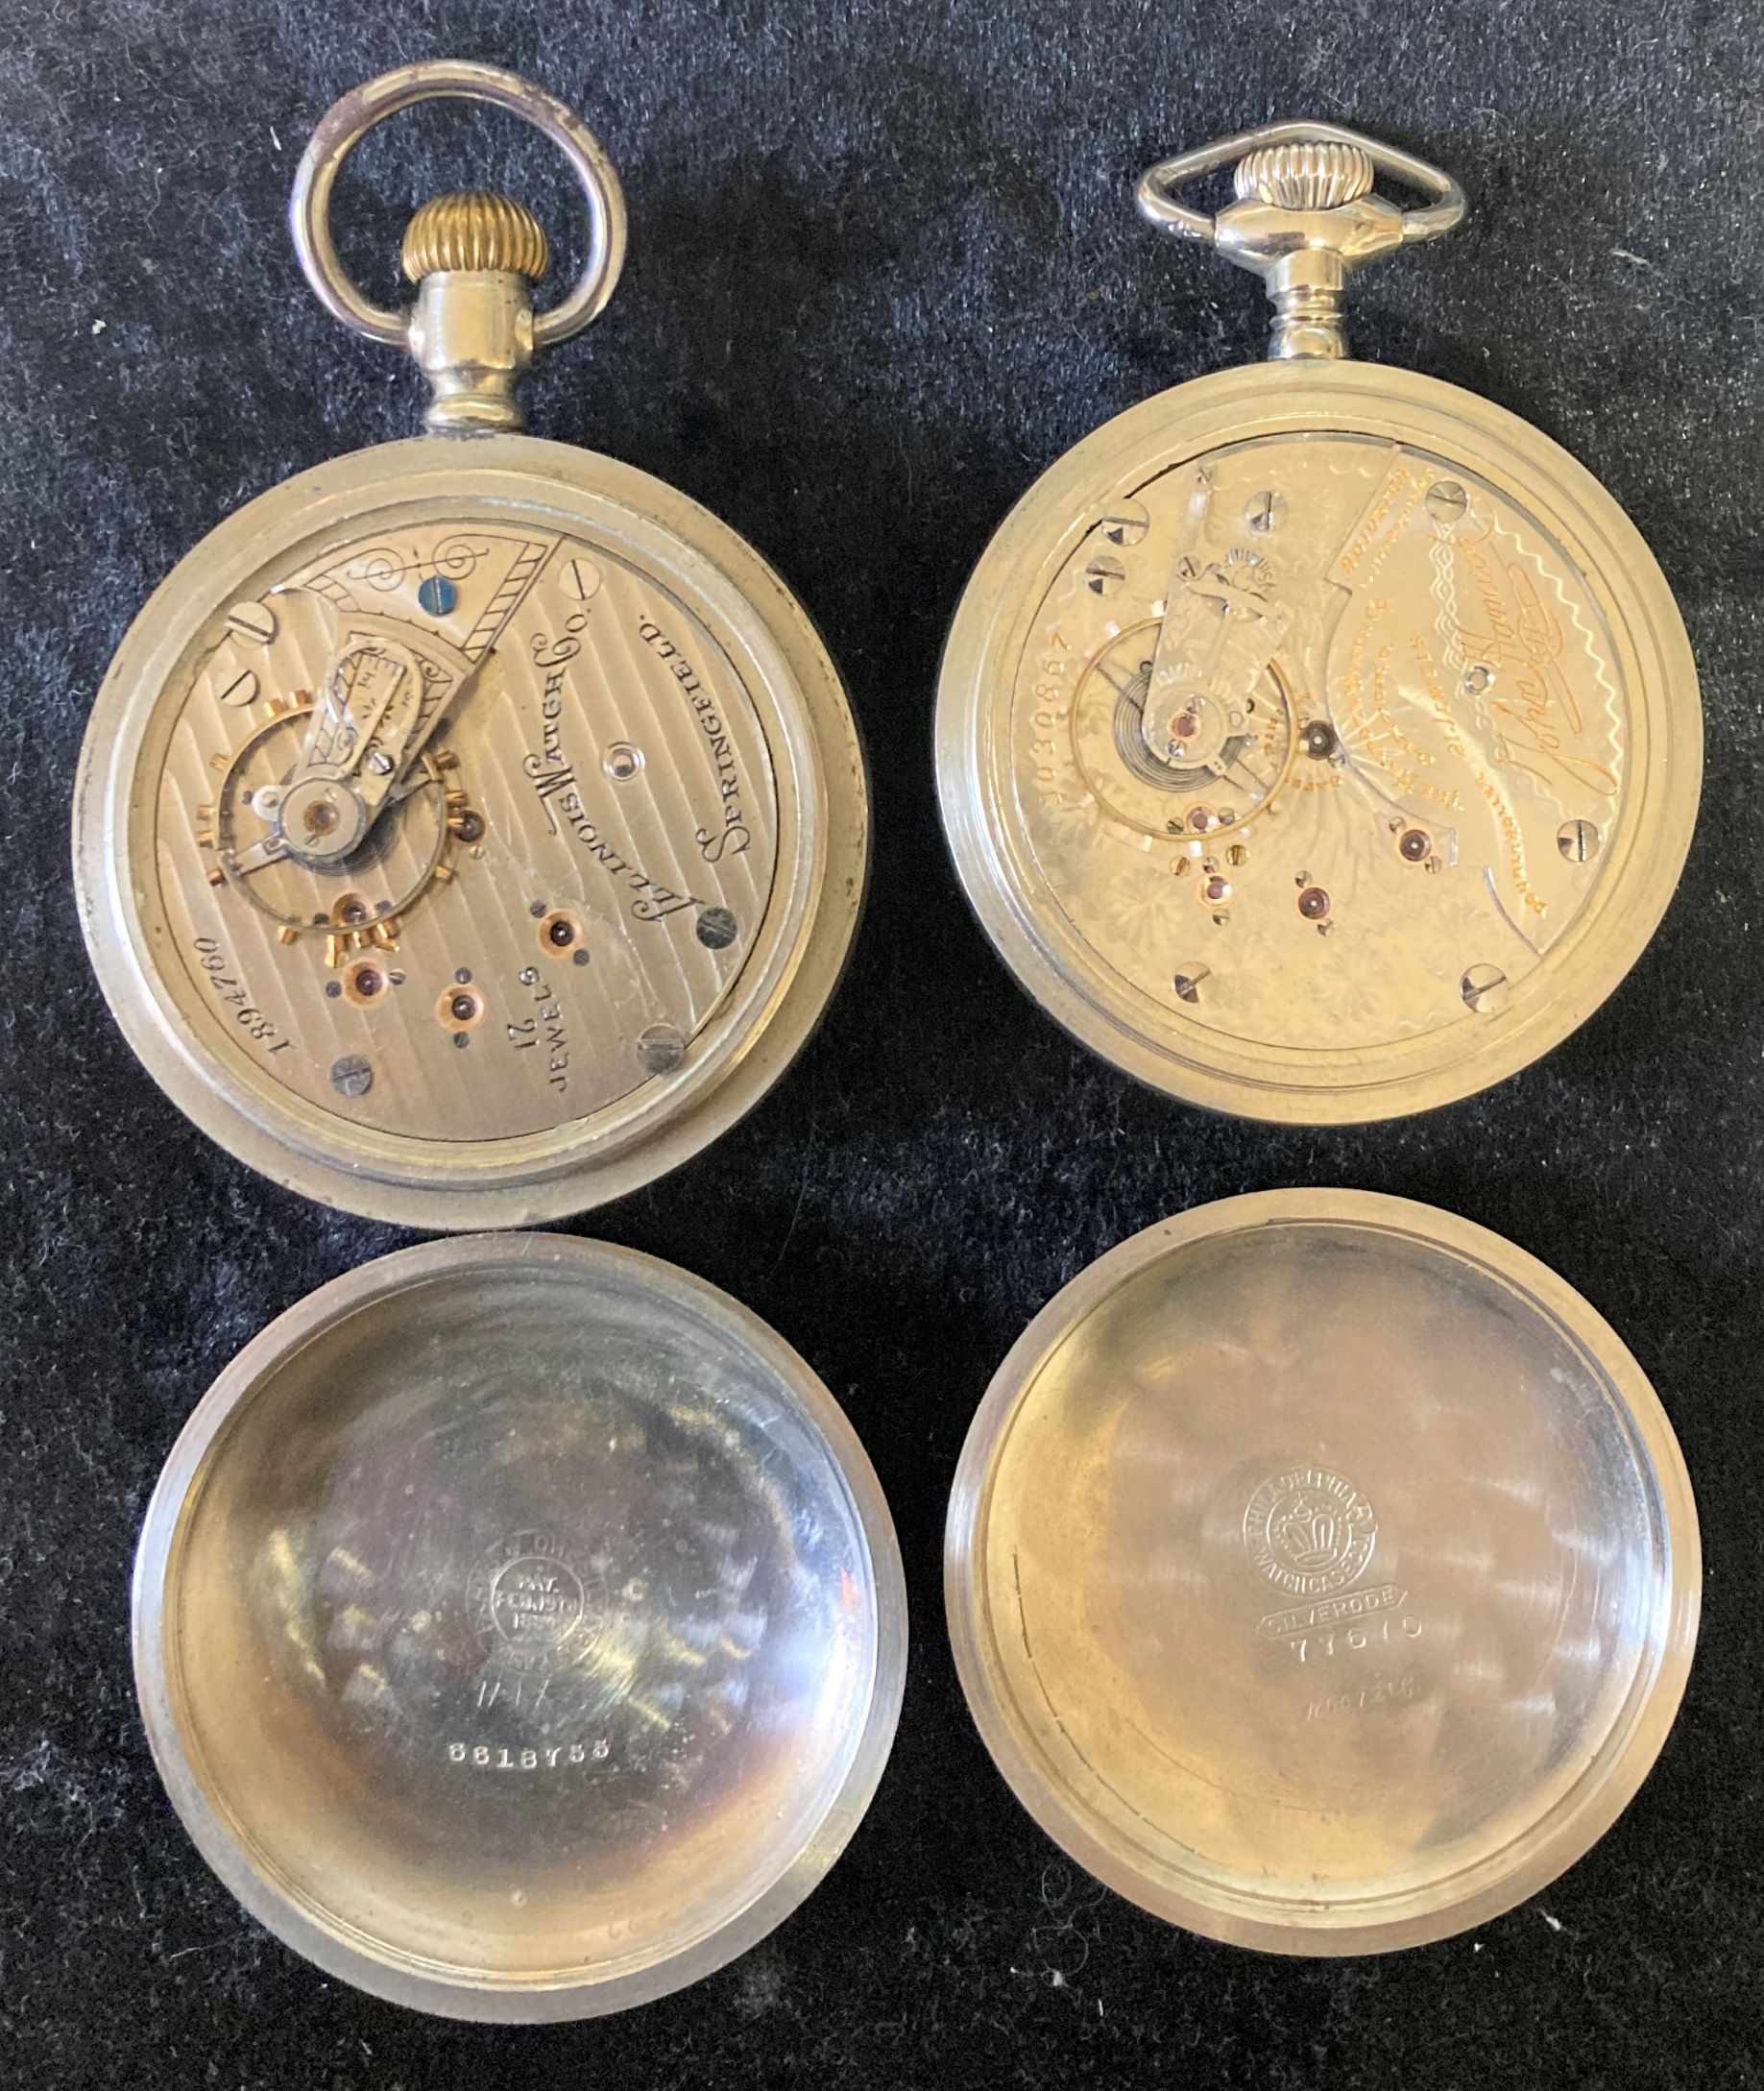 2 American screw case pocket watches: Hampden Watch Co. & Illinois Watch Co. - Image 3 of 3